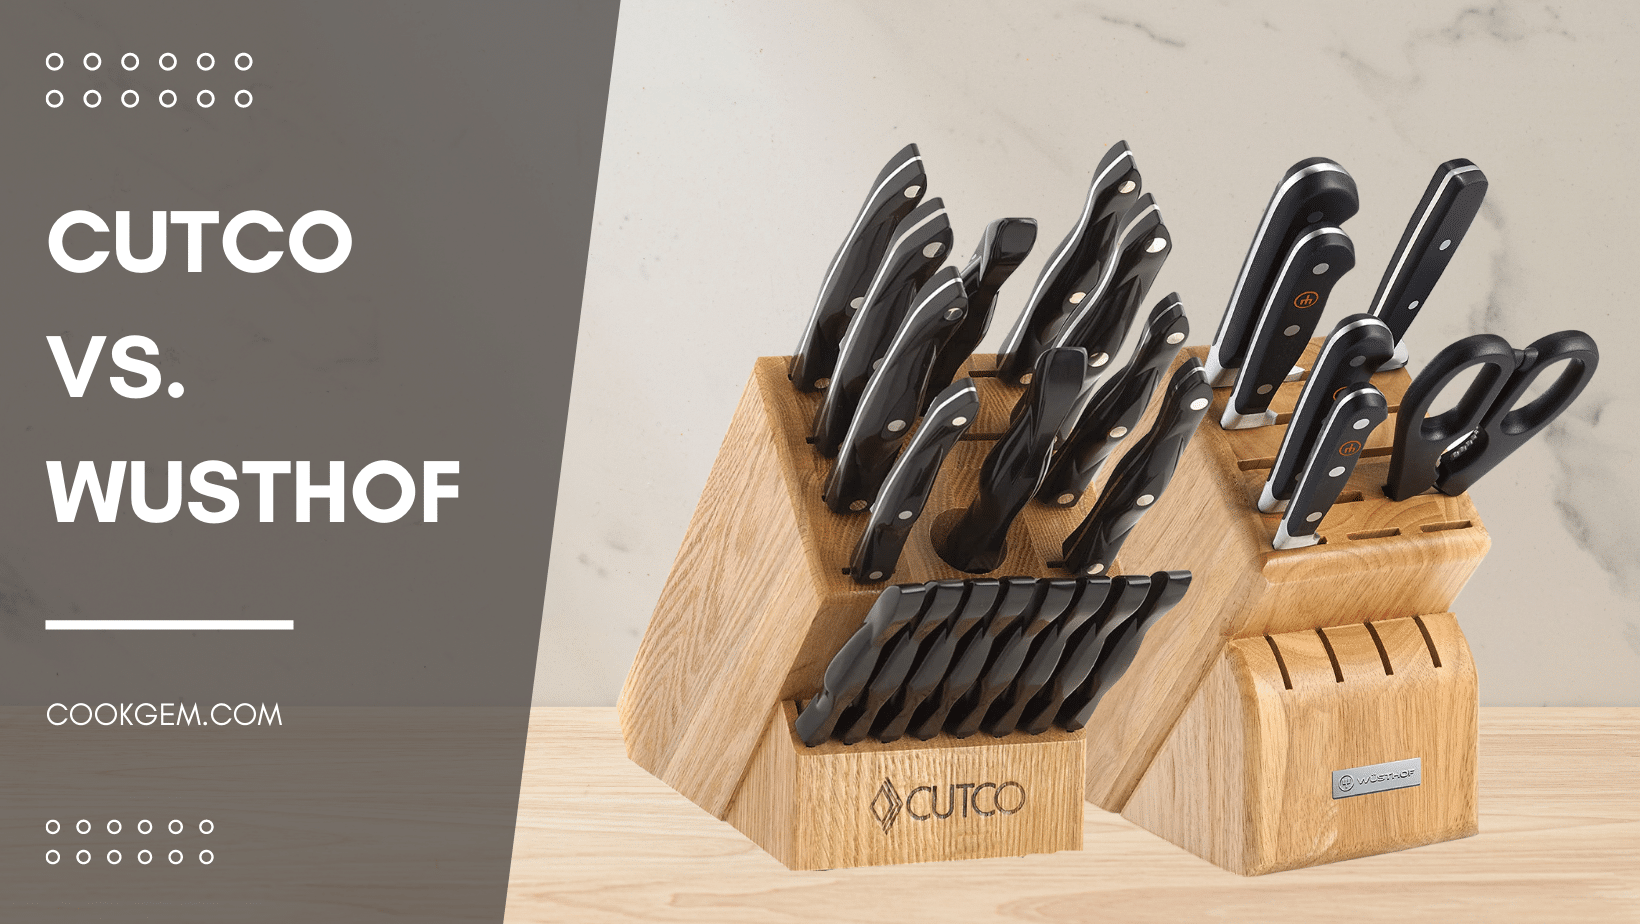 Cutco vs. Wusthof Kitchen Knives (Which Are Better?) - Prudent Reviews